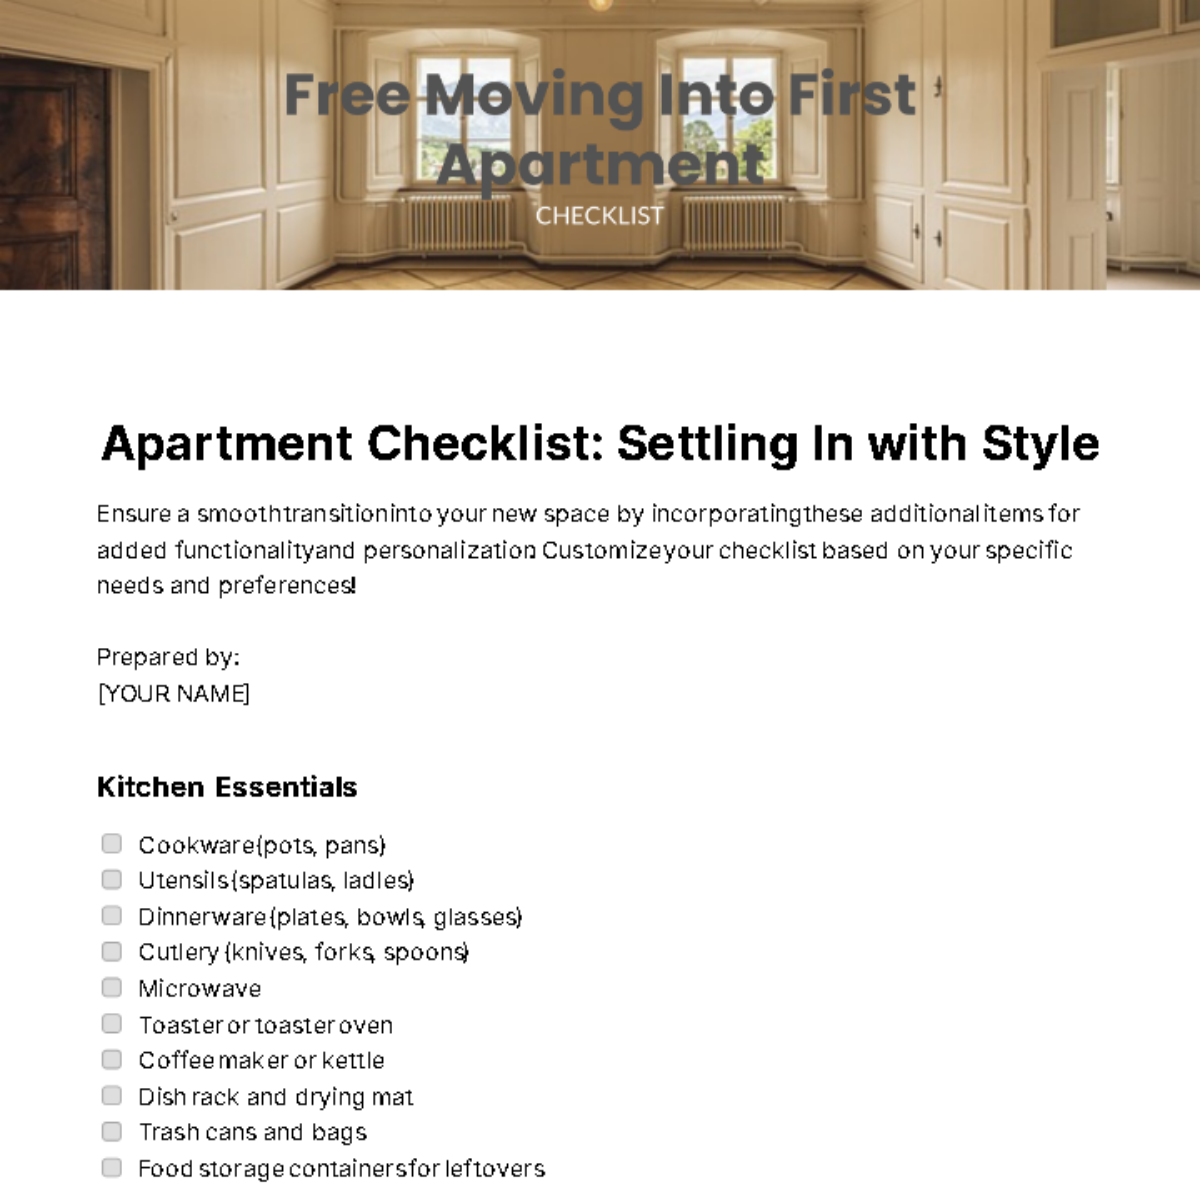 Moving Into First Apartment Checklist Template